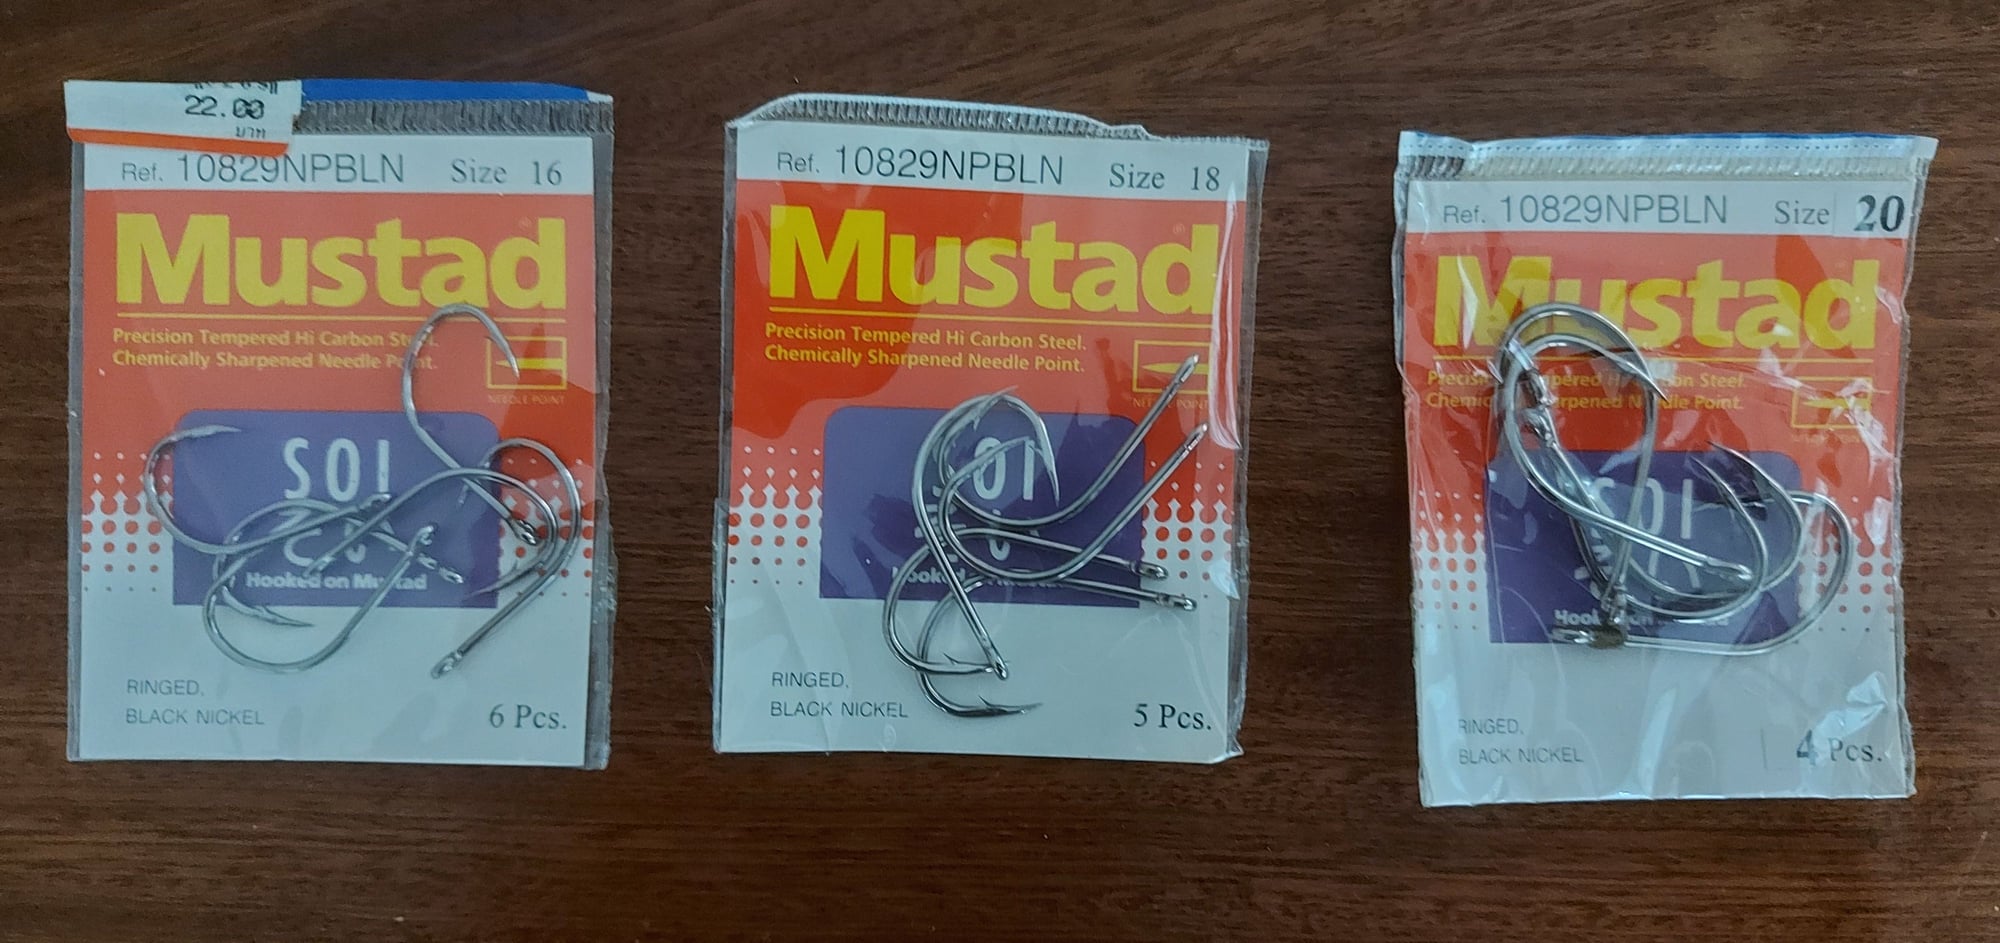 Mustad Hook sizes - The Hull Truth - Boating and Fishing Forum